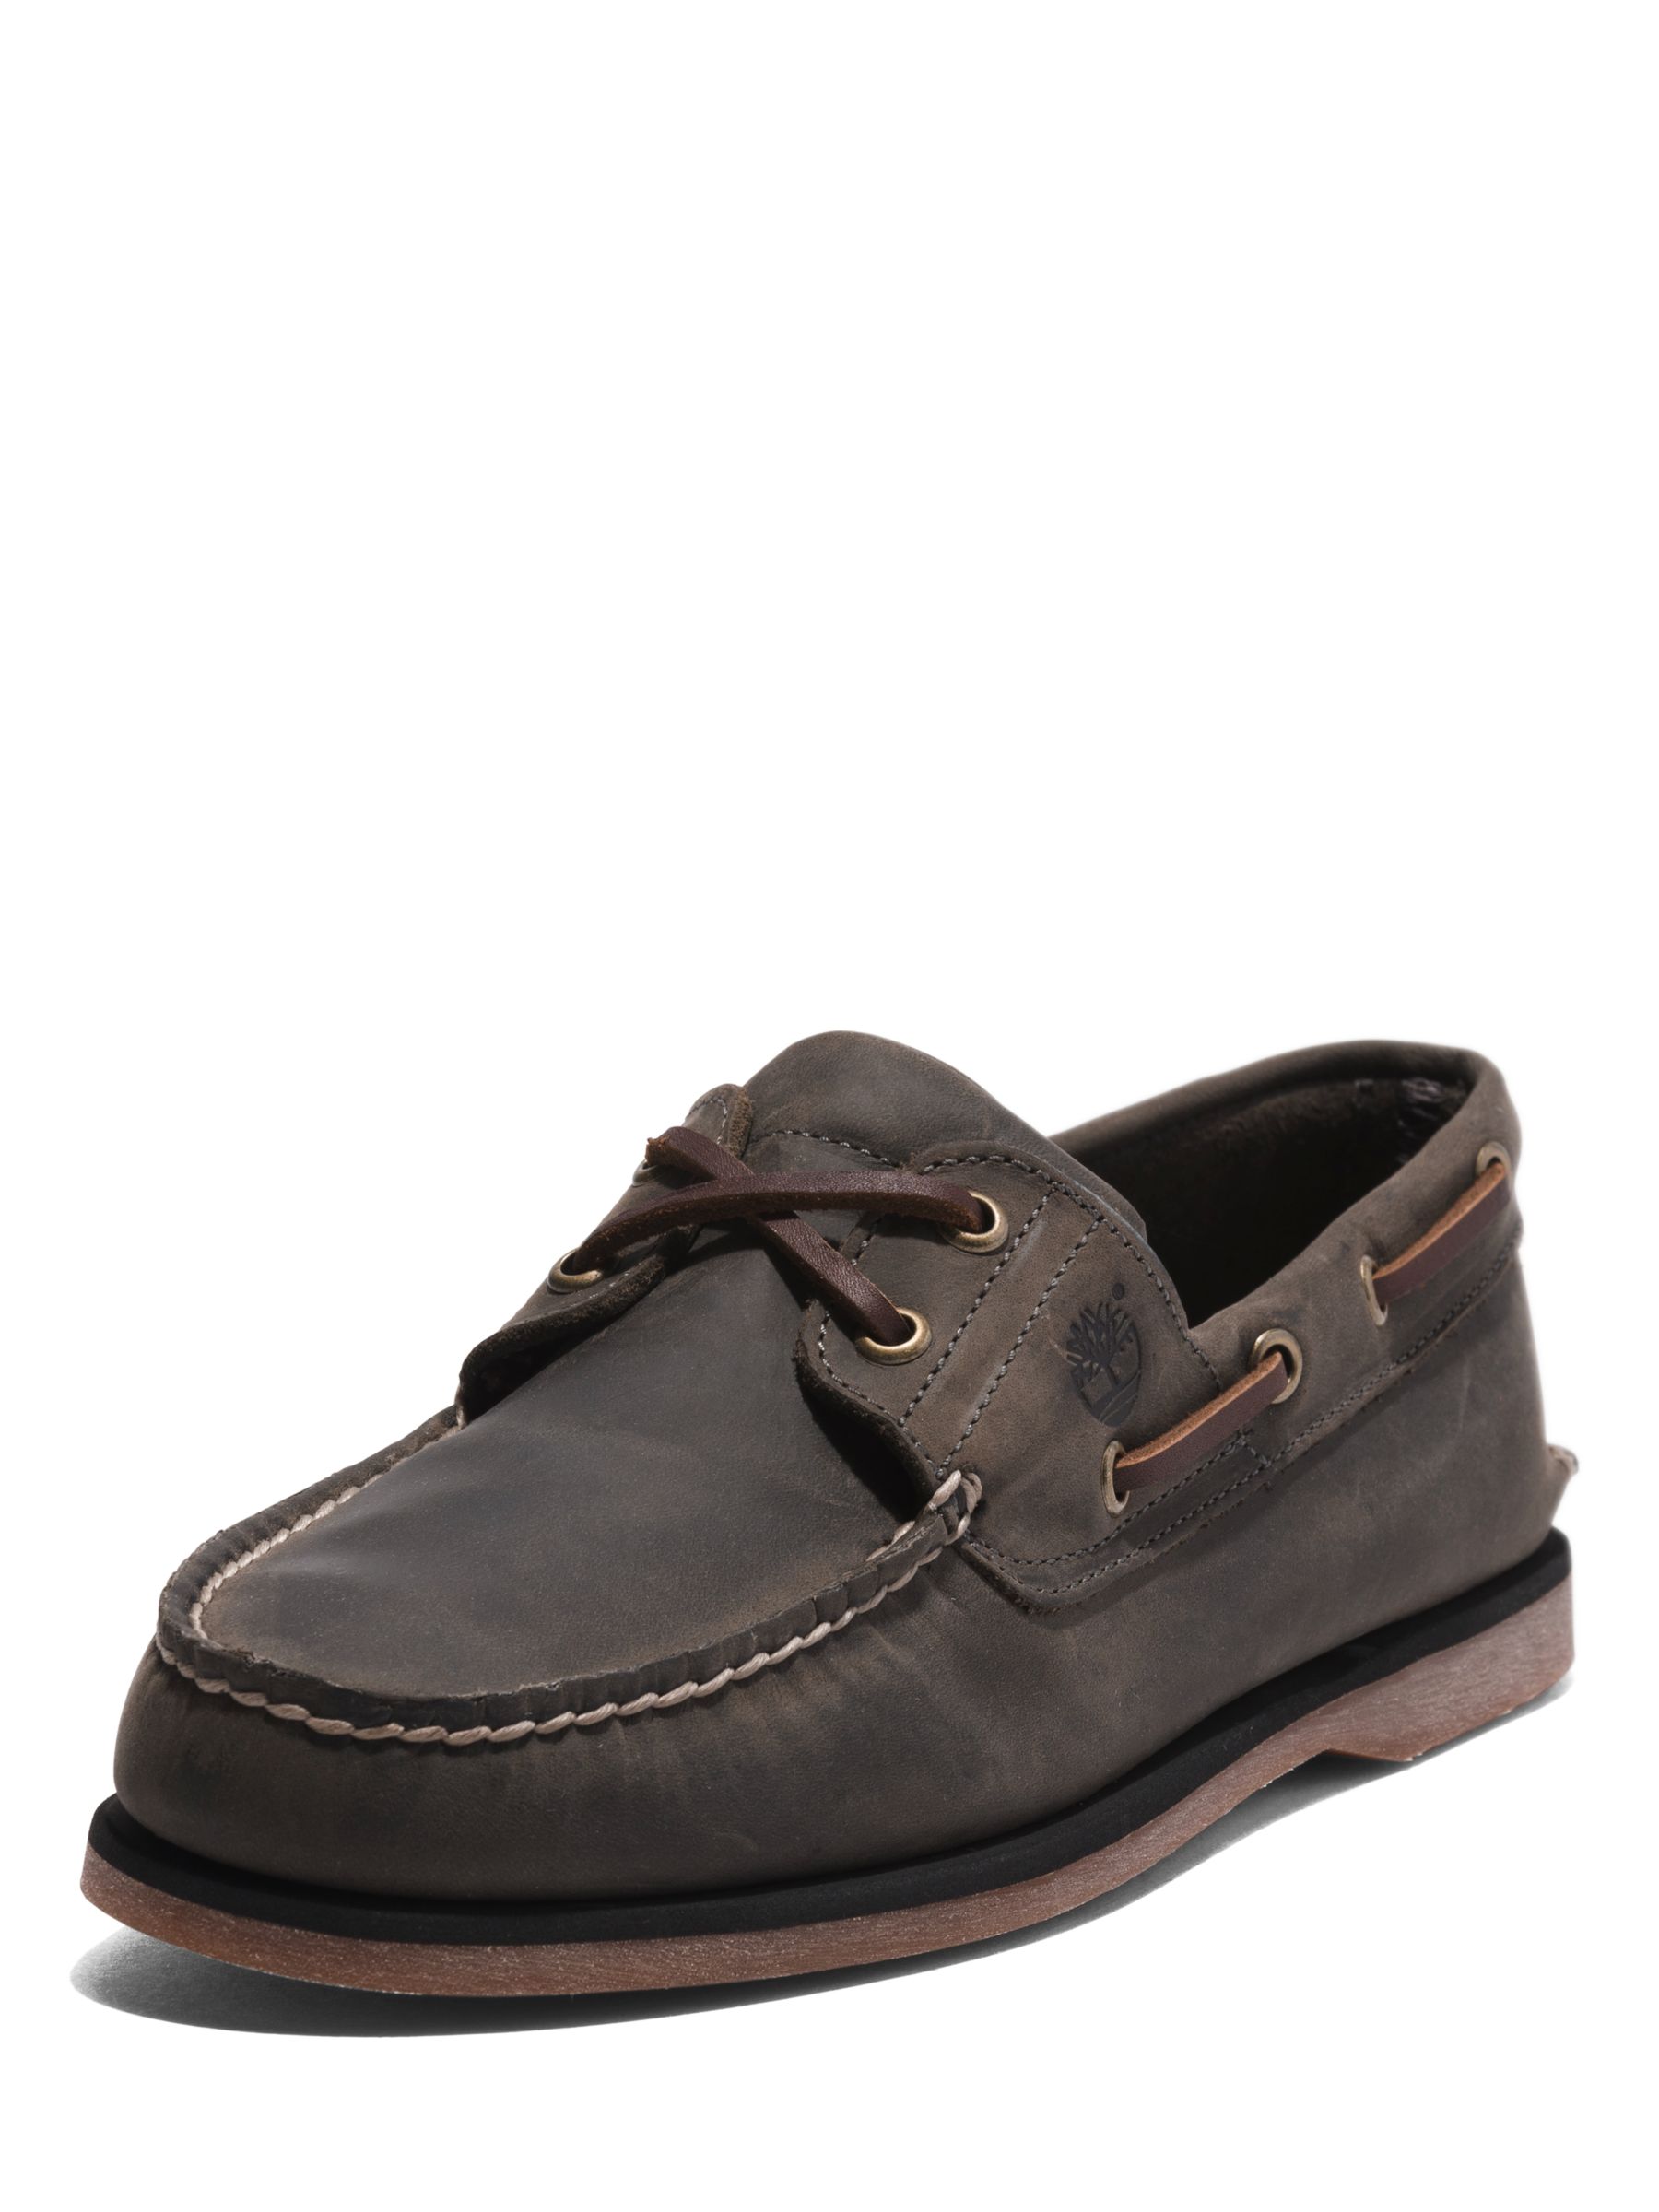 Buy Timberland Classic Boat Shoes, Mid Grey Online at johnlewis.com